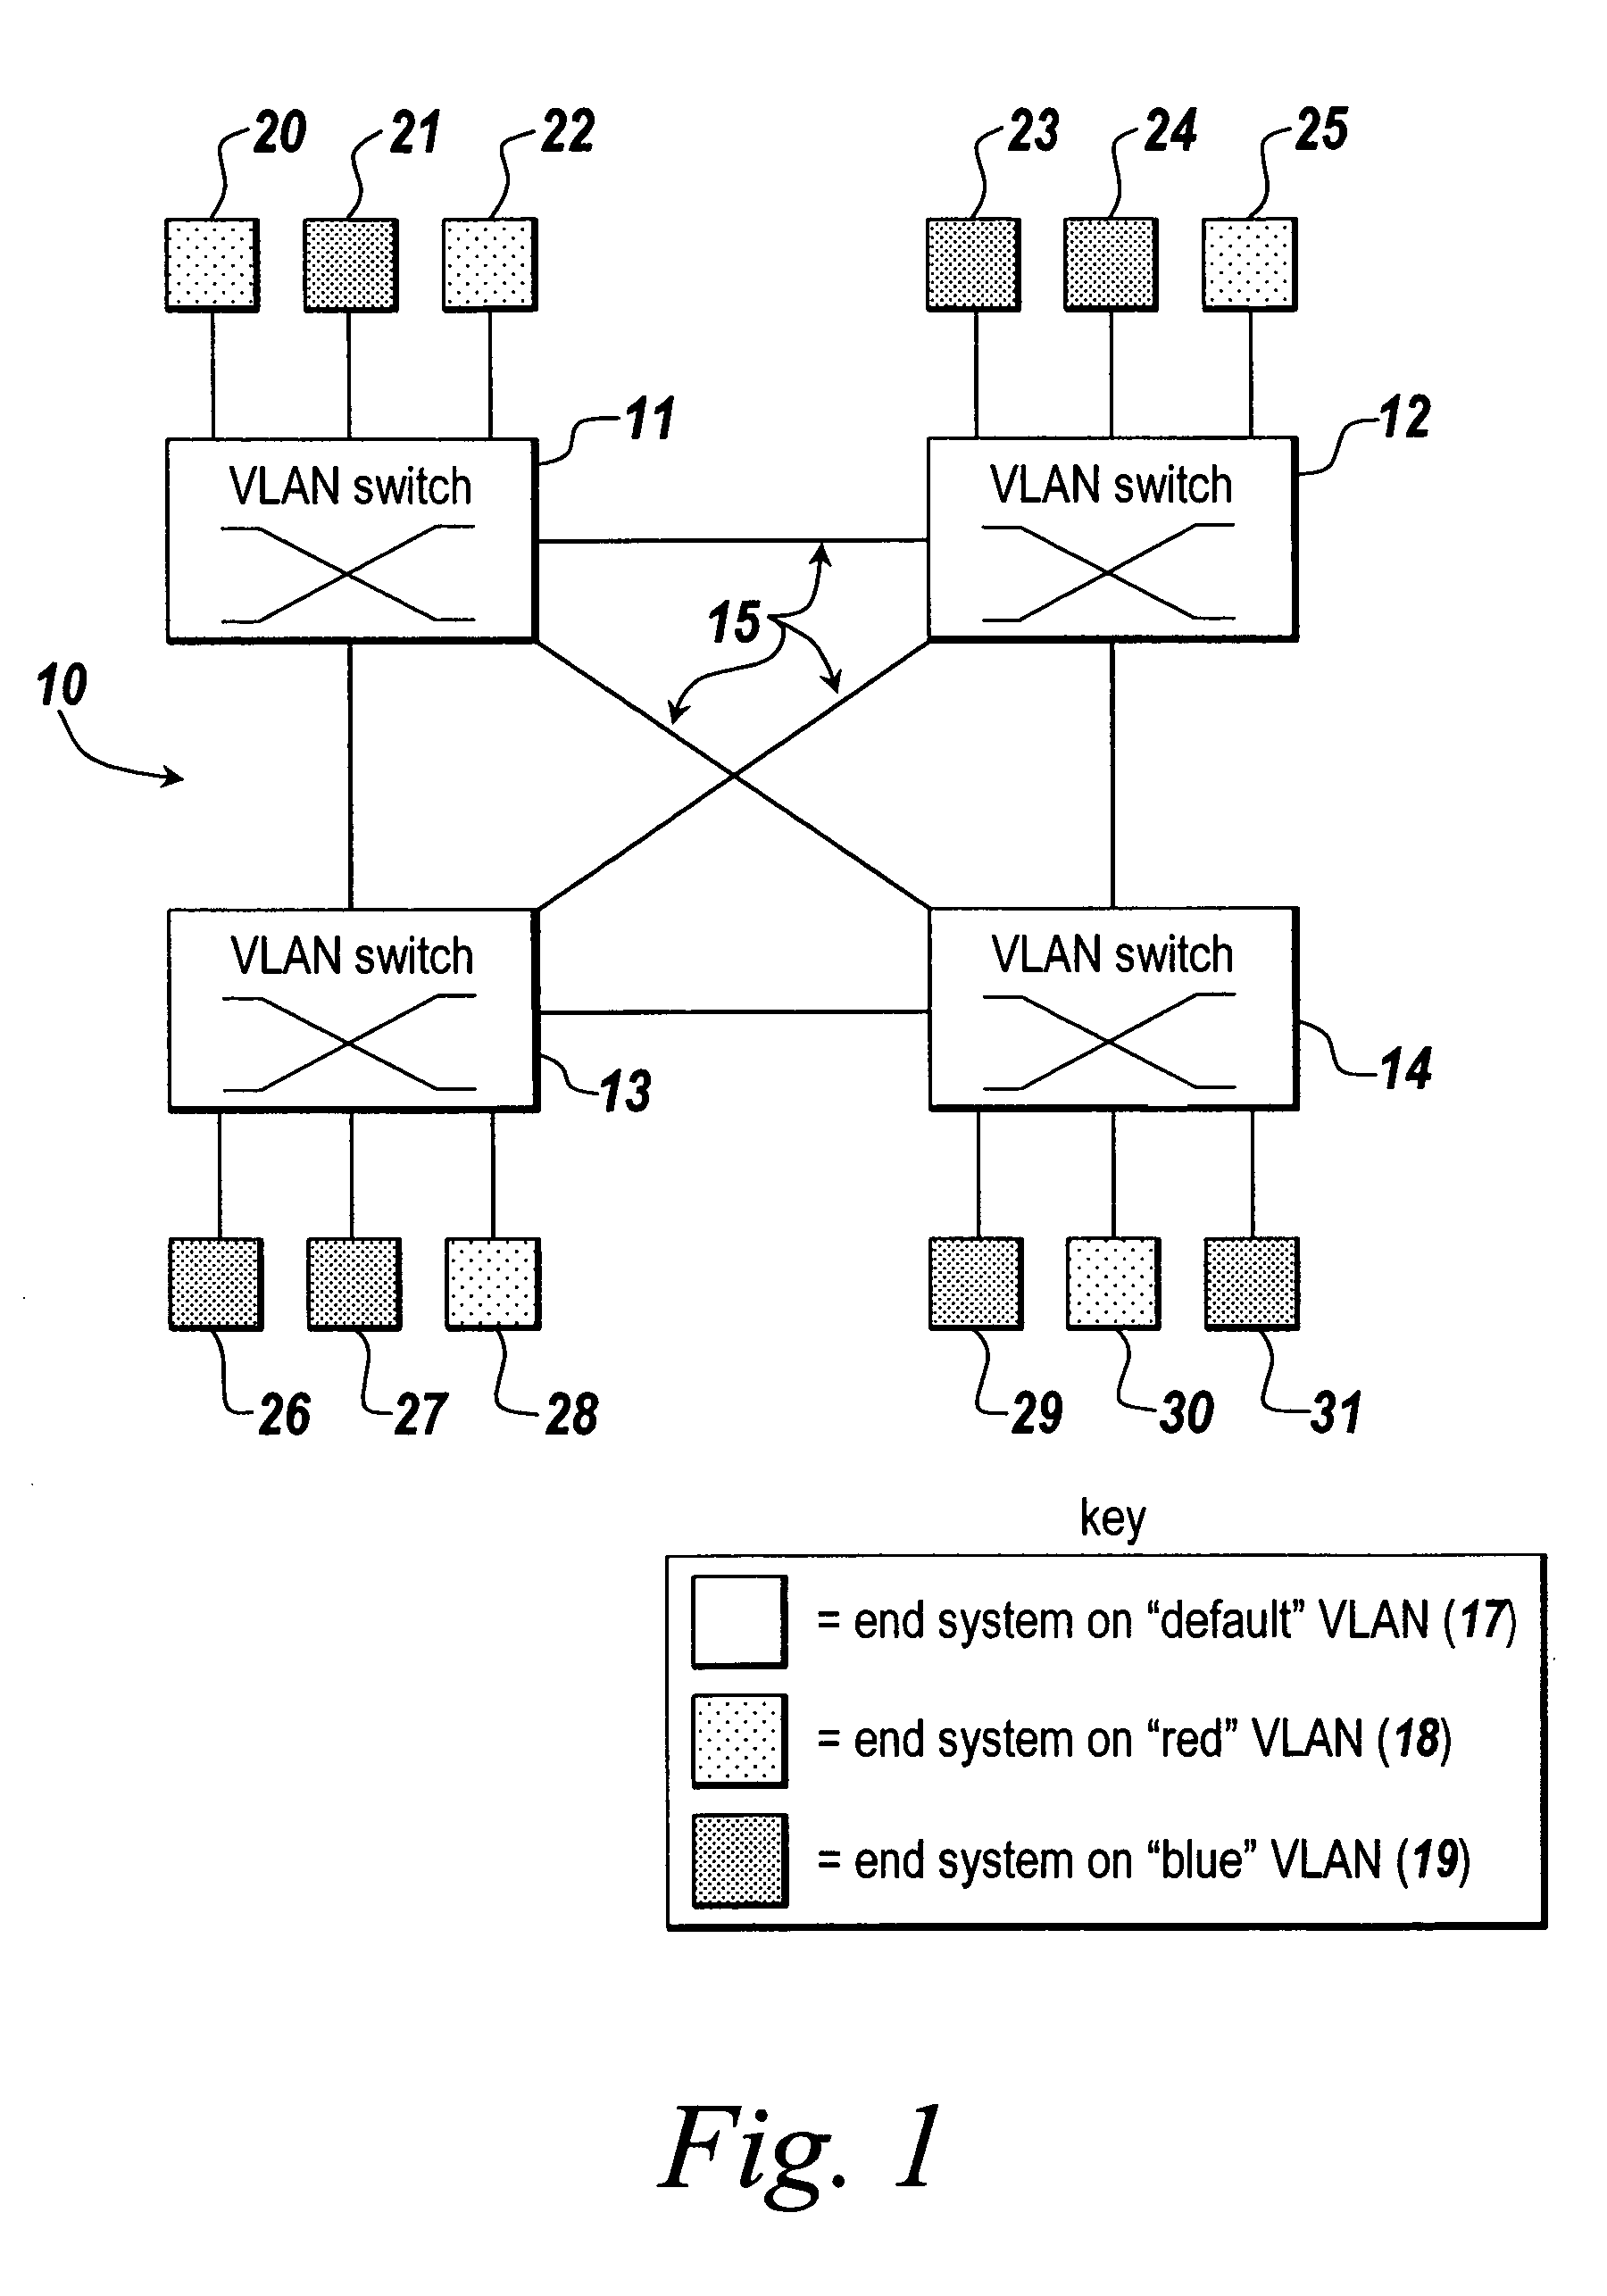 Distributed connection-oriented services for switched communication networks